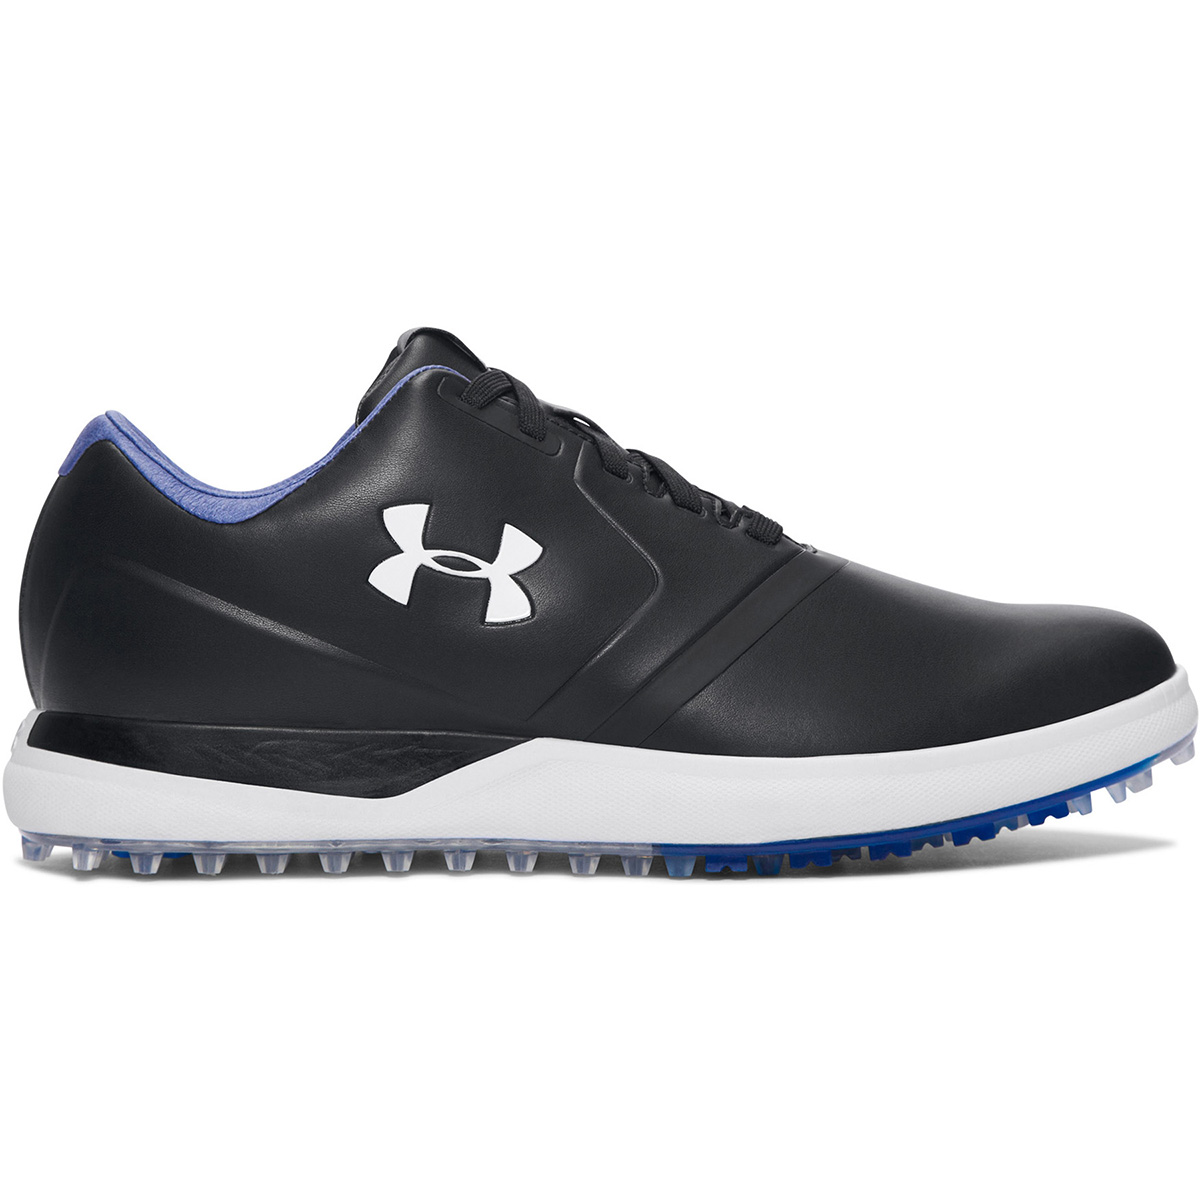 AJF,under armour performance sl leather 